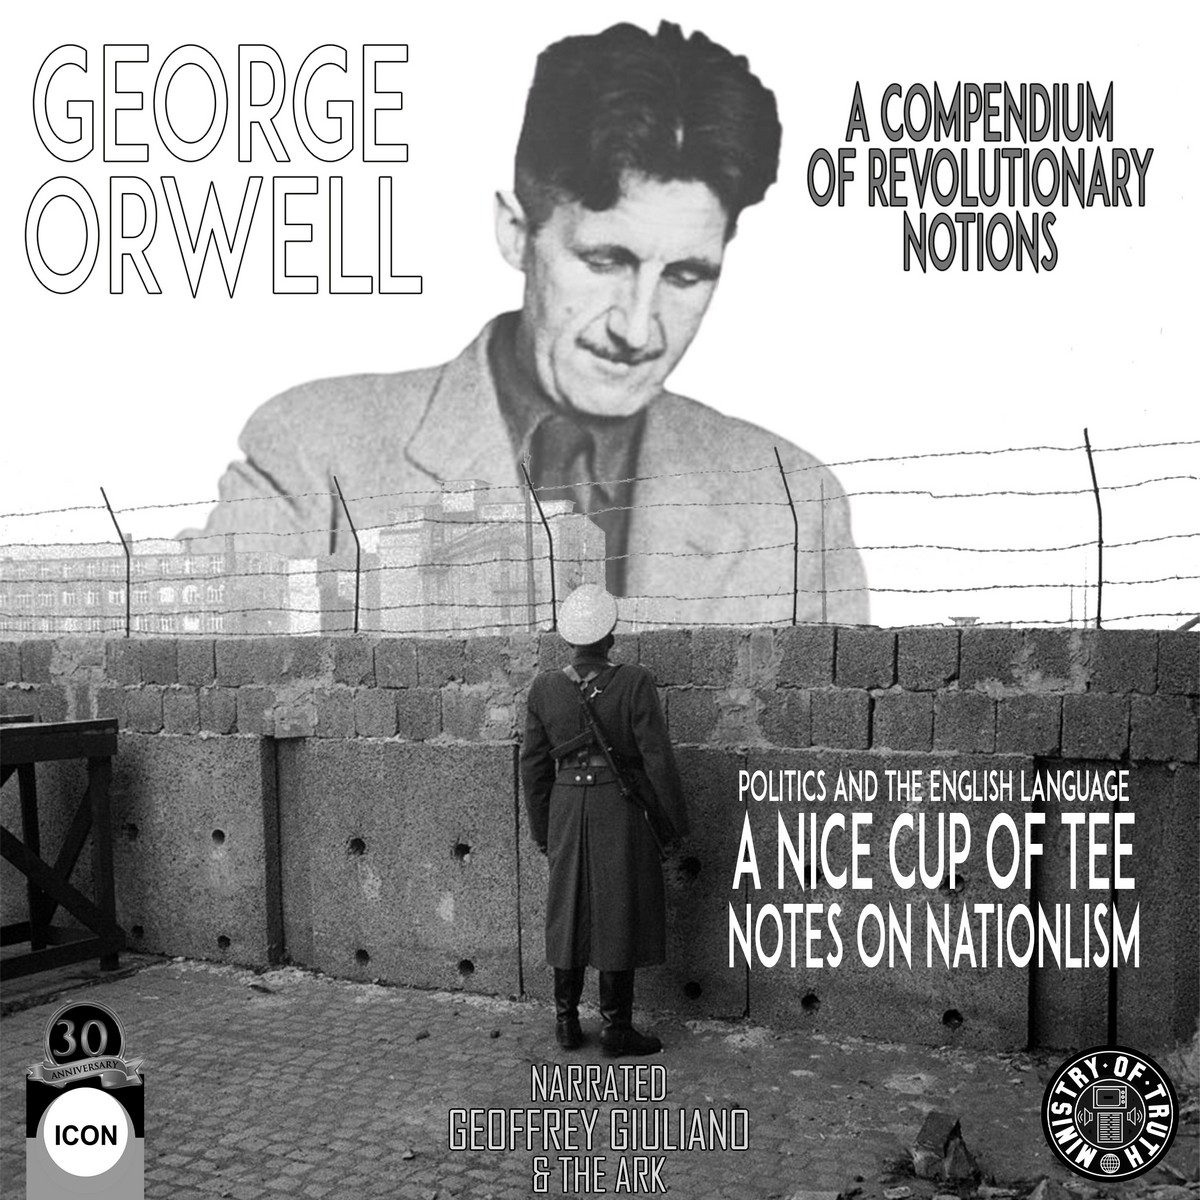 A Compendium Of Revolutionary Notions – Politics And The English Language A Nice Cup Of Tee